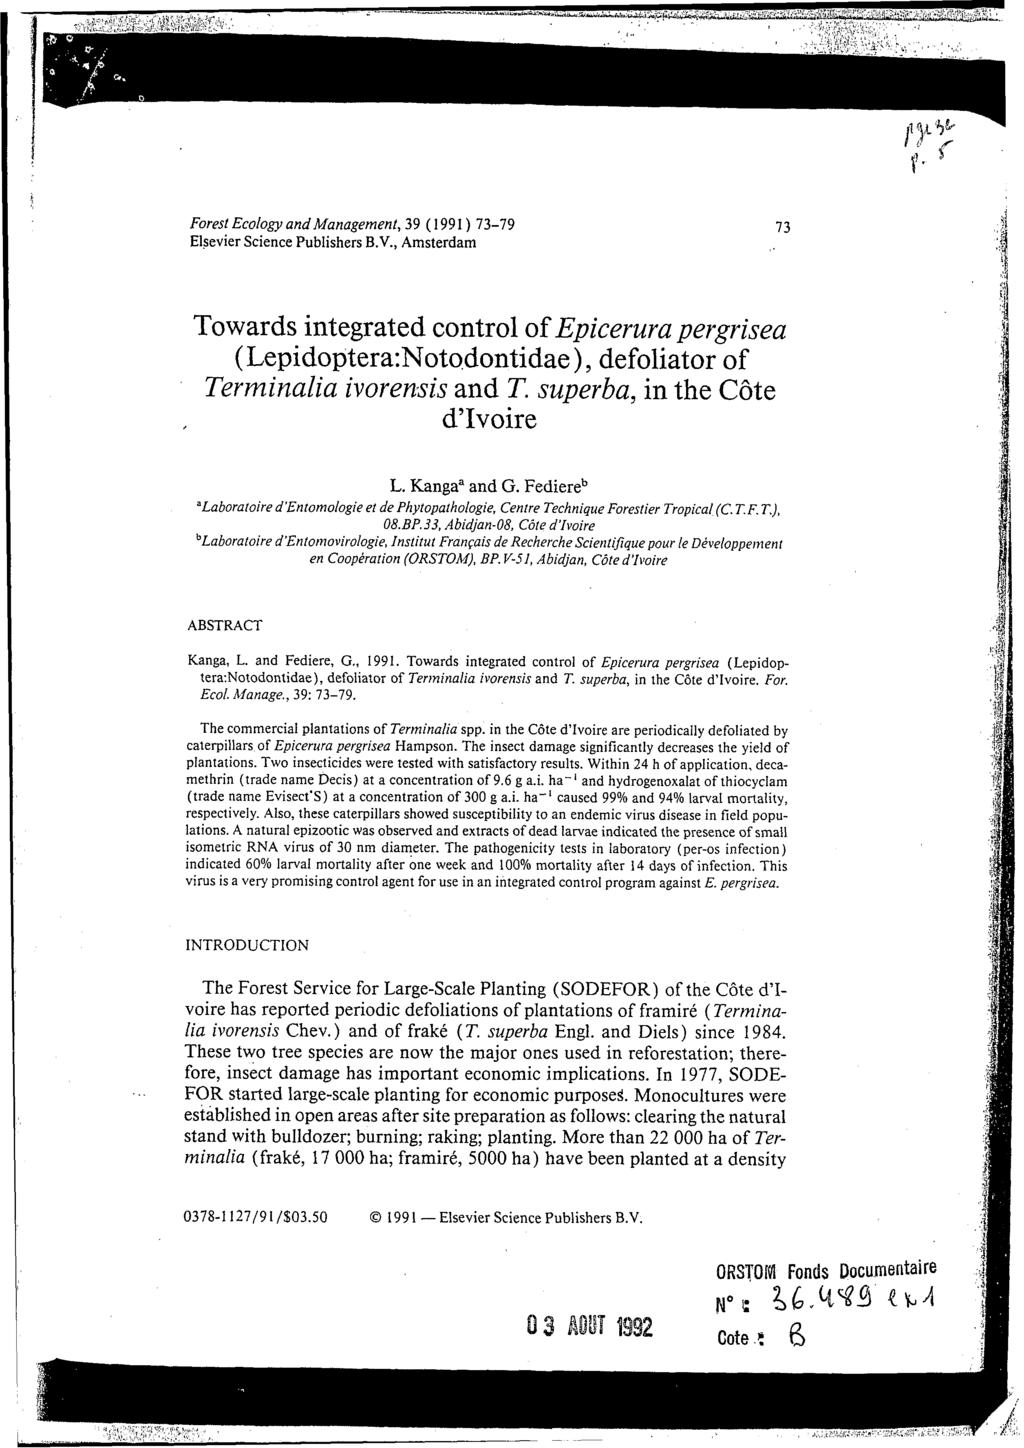 Forest Ecology and Management, 39 ( 199 1 ) 73-79 Elsevier Science Publishers B.V., Amsterdam 13 Towards integrated control of Epicerura pergrisea (Lepidoptera:Noto.